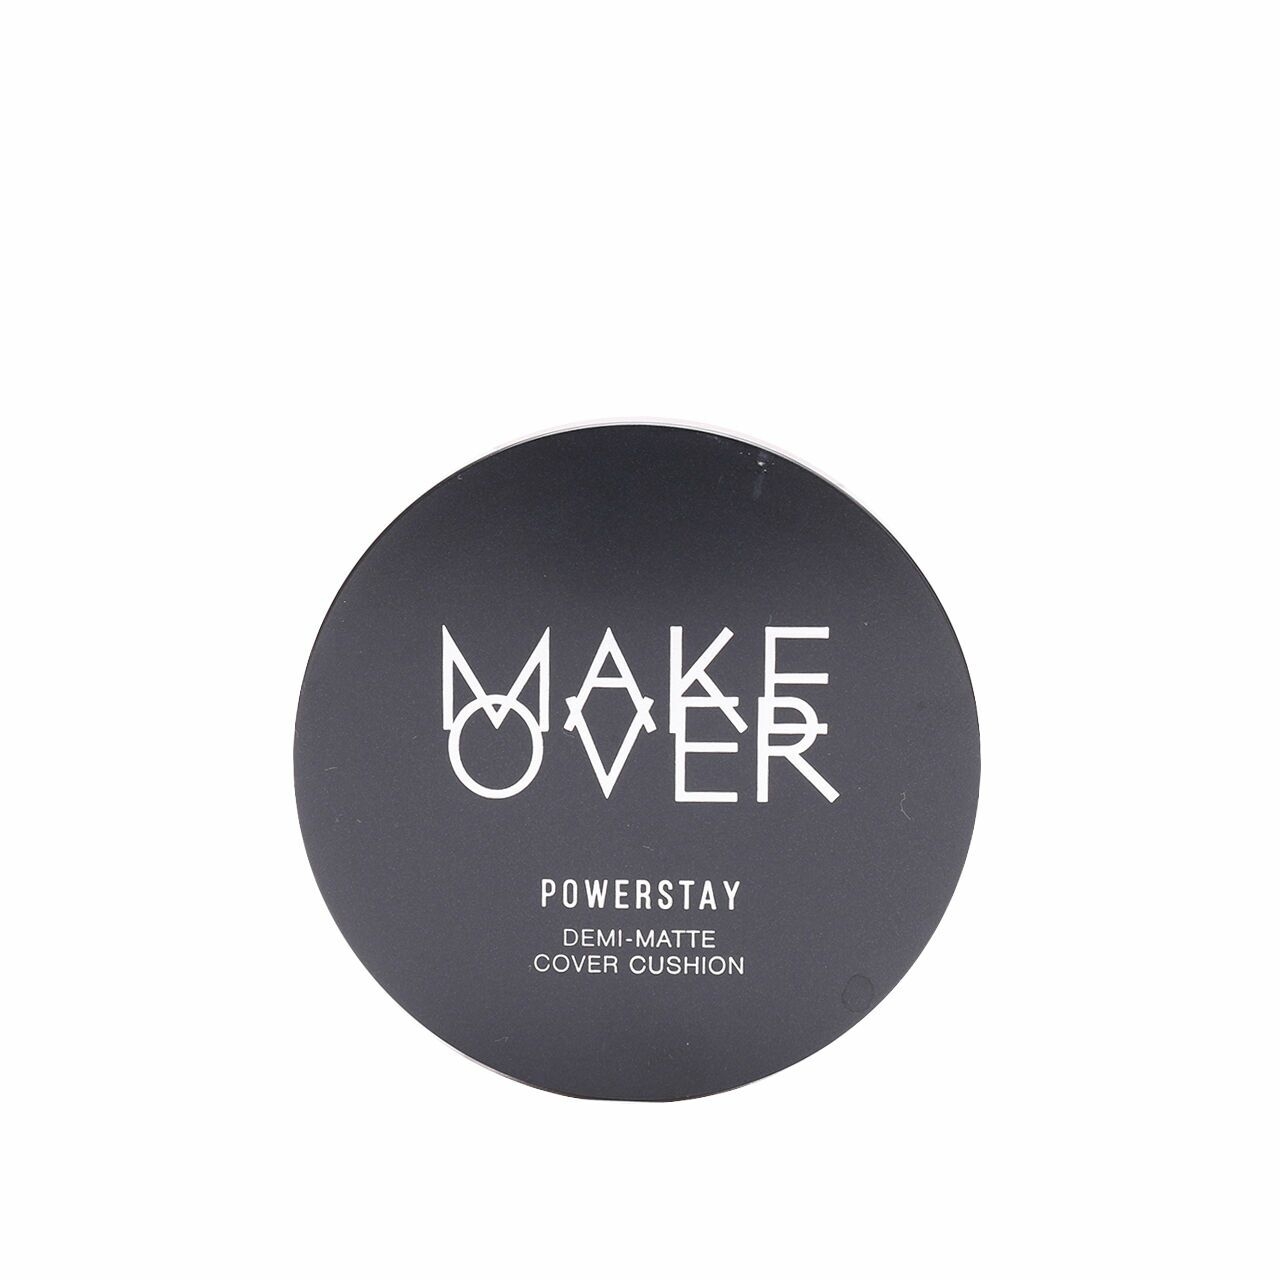 Make Over Powerstay Demi-Matte Cover Cushion Faces